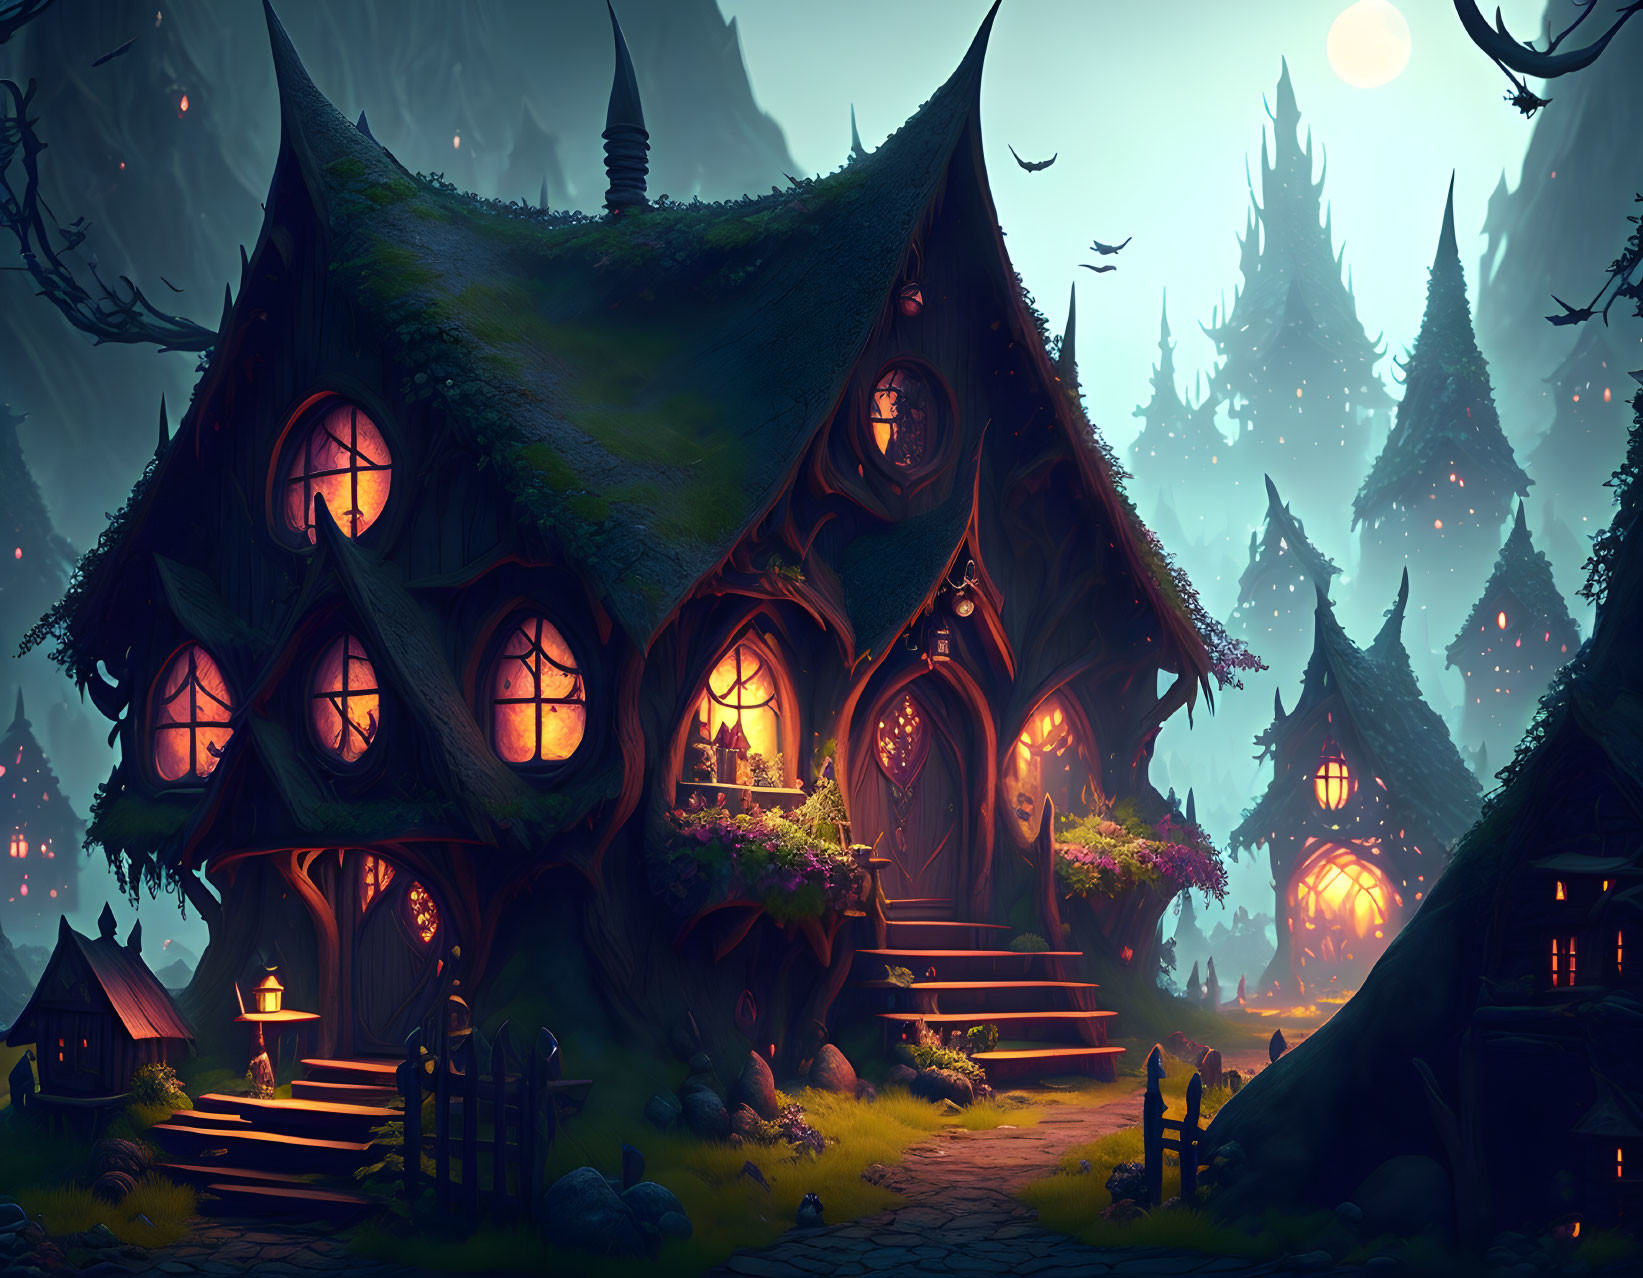 Magical forest village illustration at twilight with whimsical houses